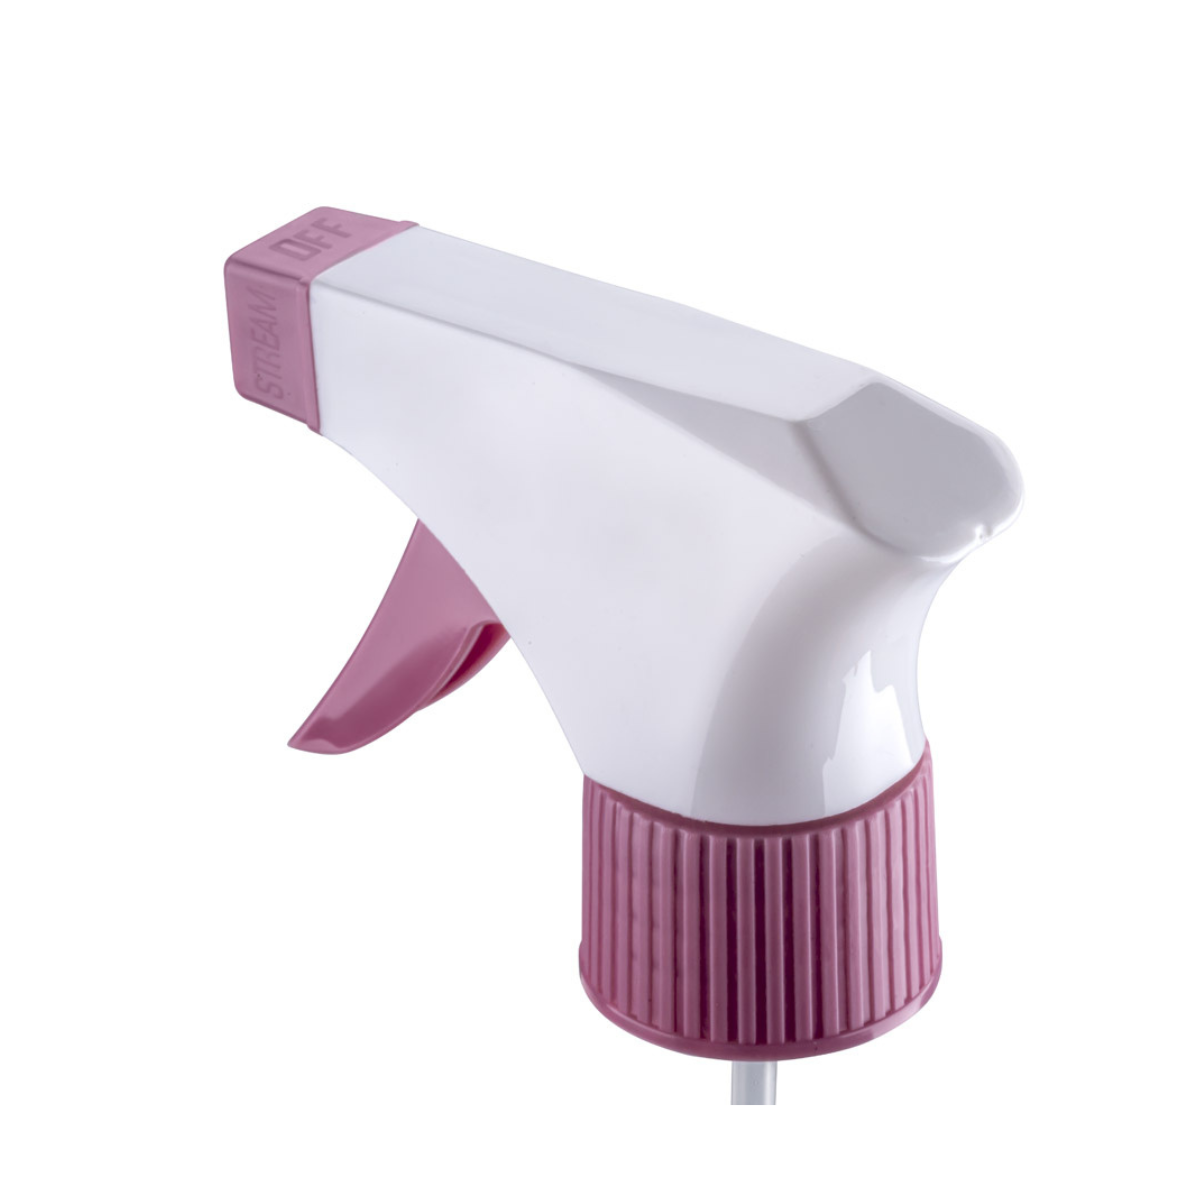 Dompel Trigger Sprayers valves, color purple, thread 28/410, made with stainless steel springs and glass balls, with spray and stream Model 101D - depilcompany